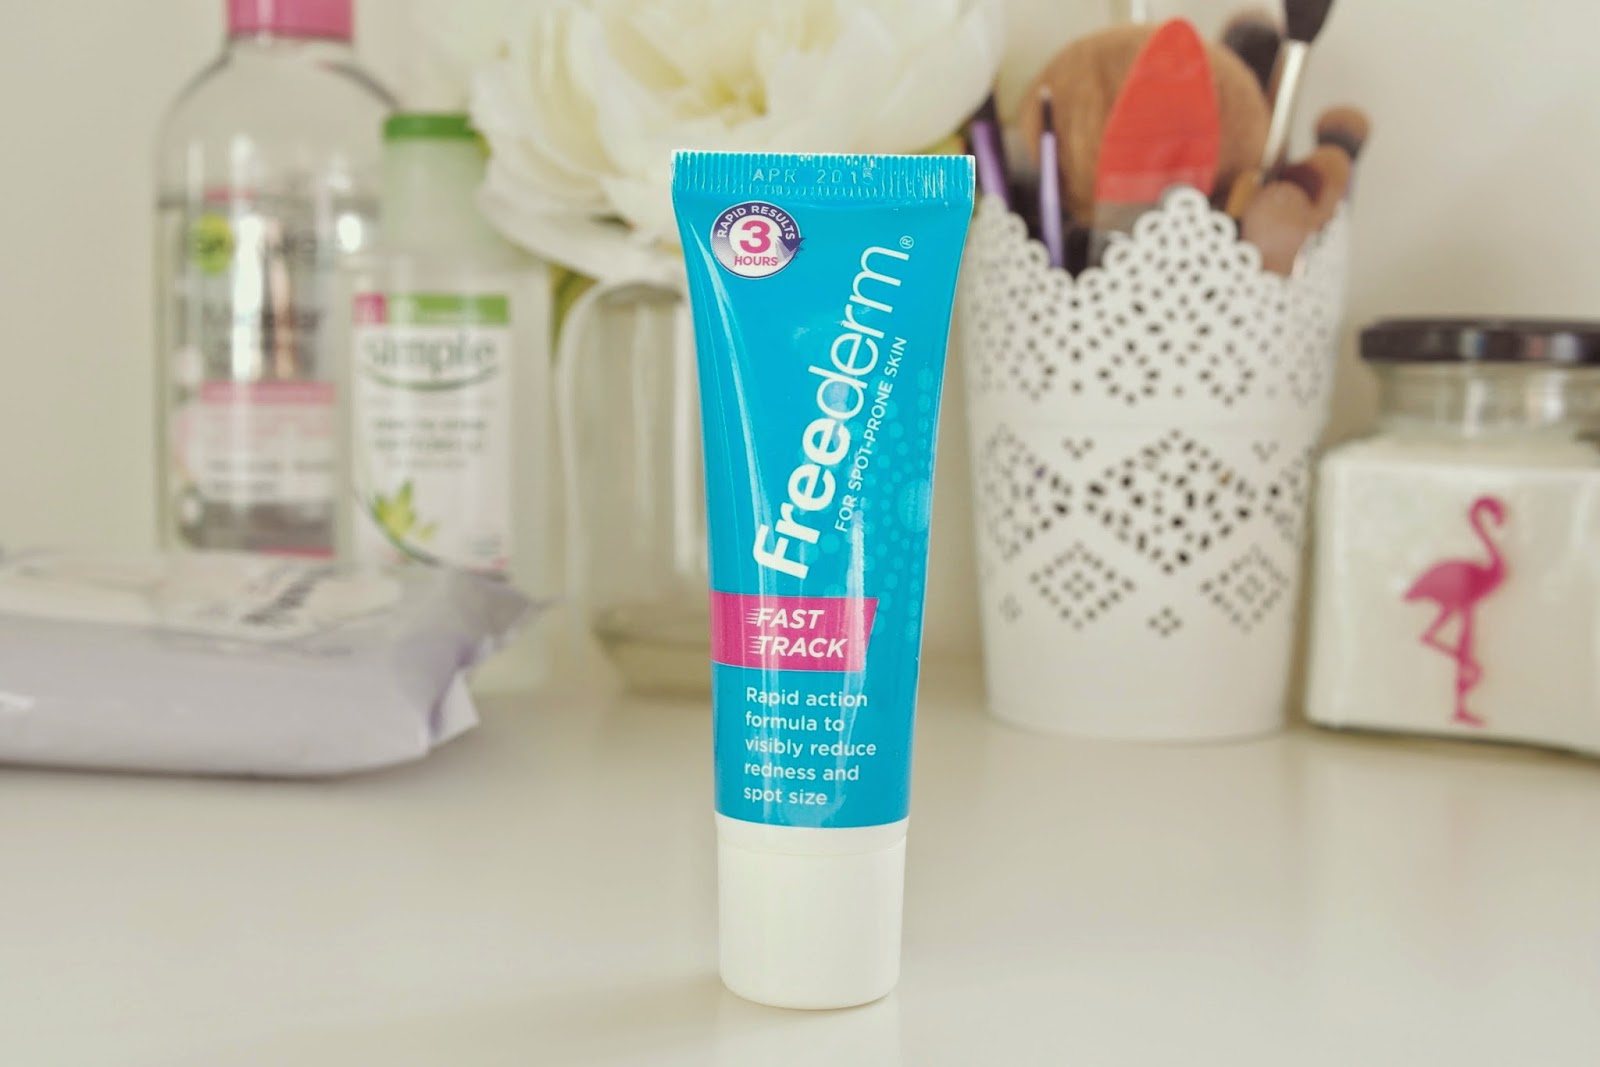 freederm fast track spot get review, beauty blog, how to get rid of spots